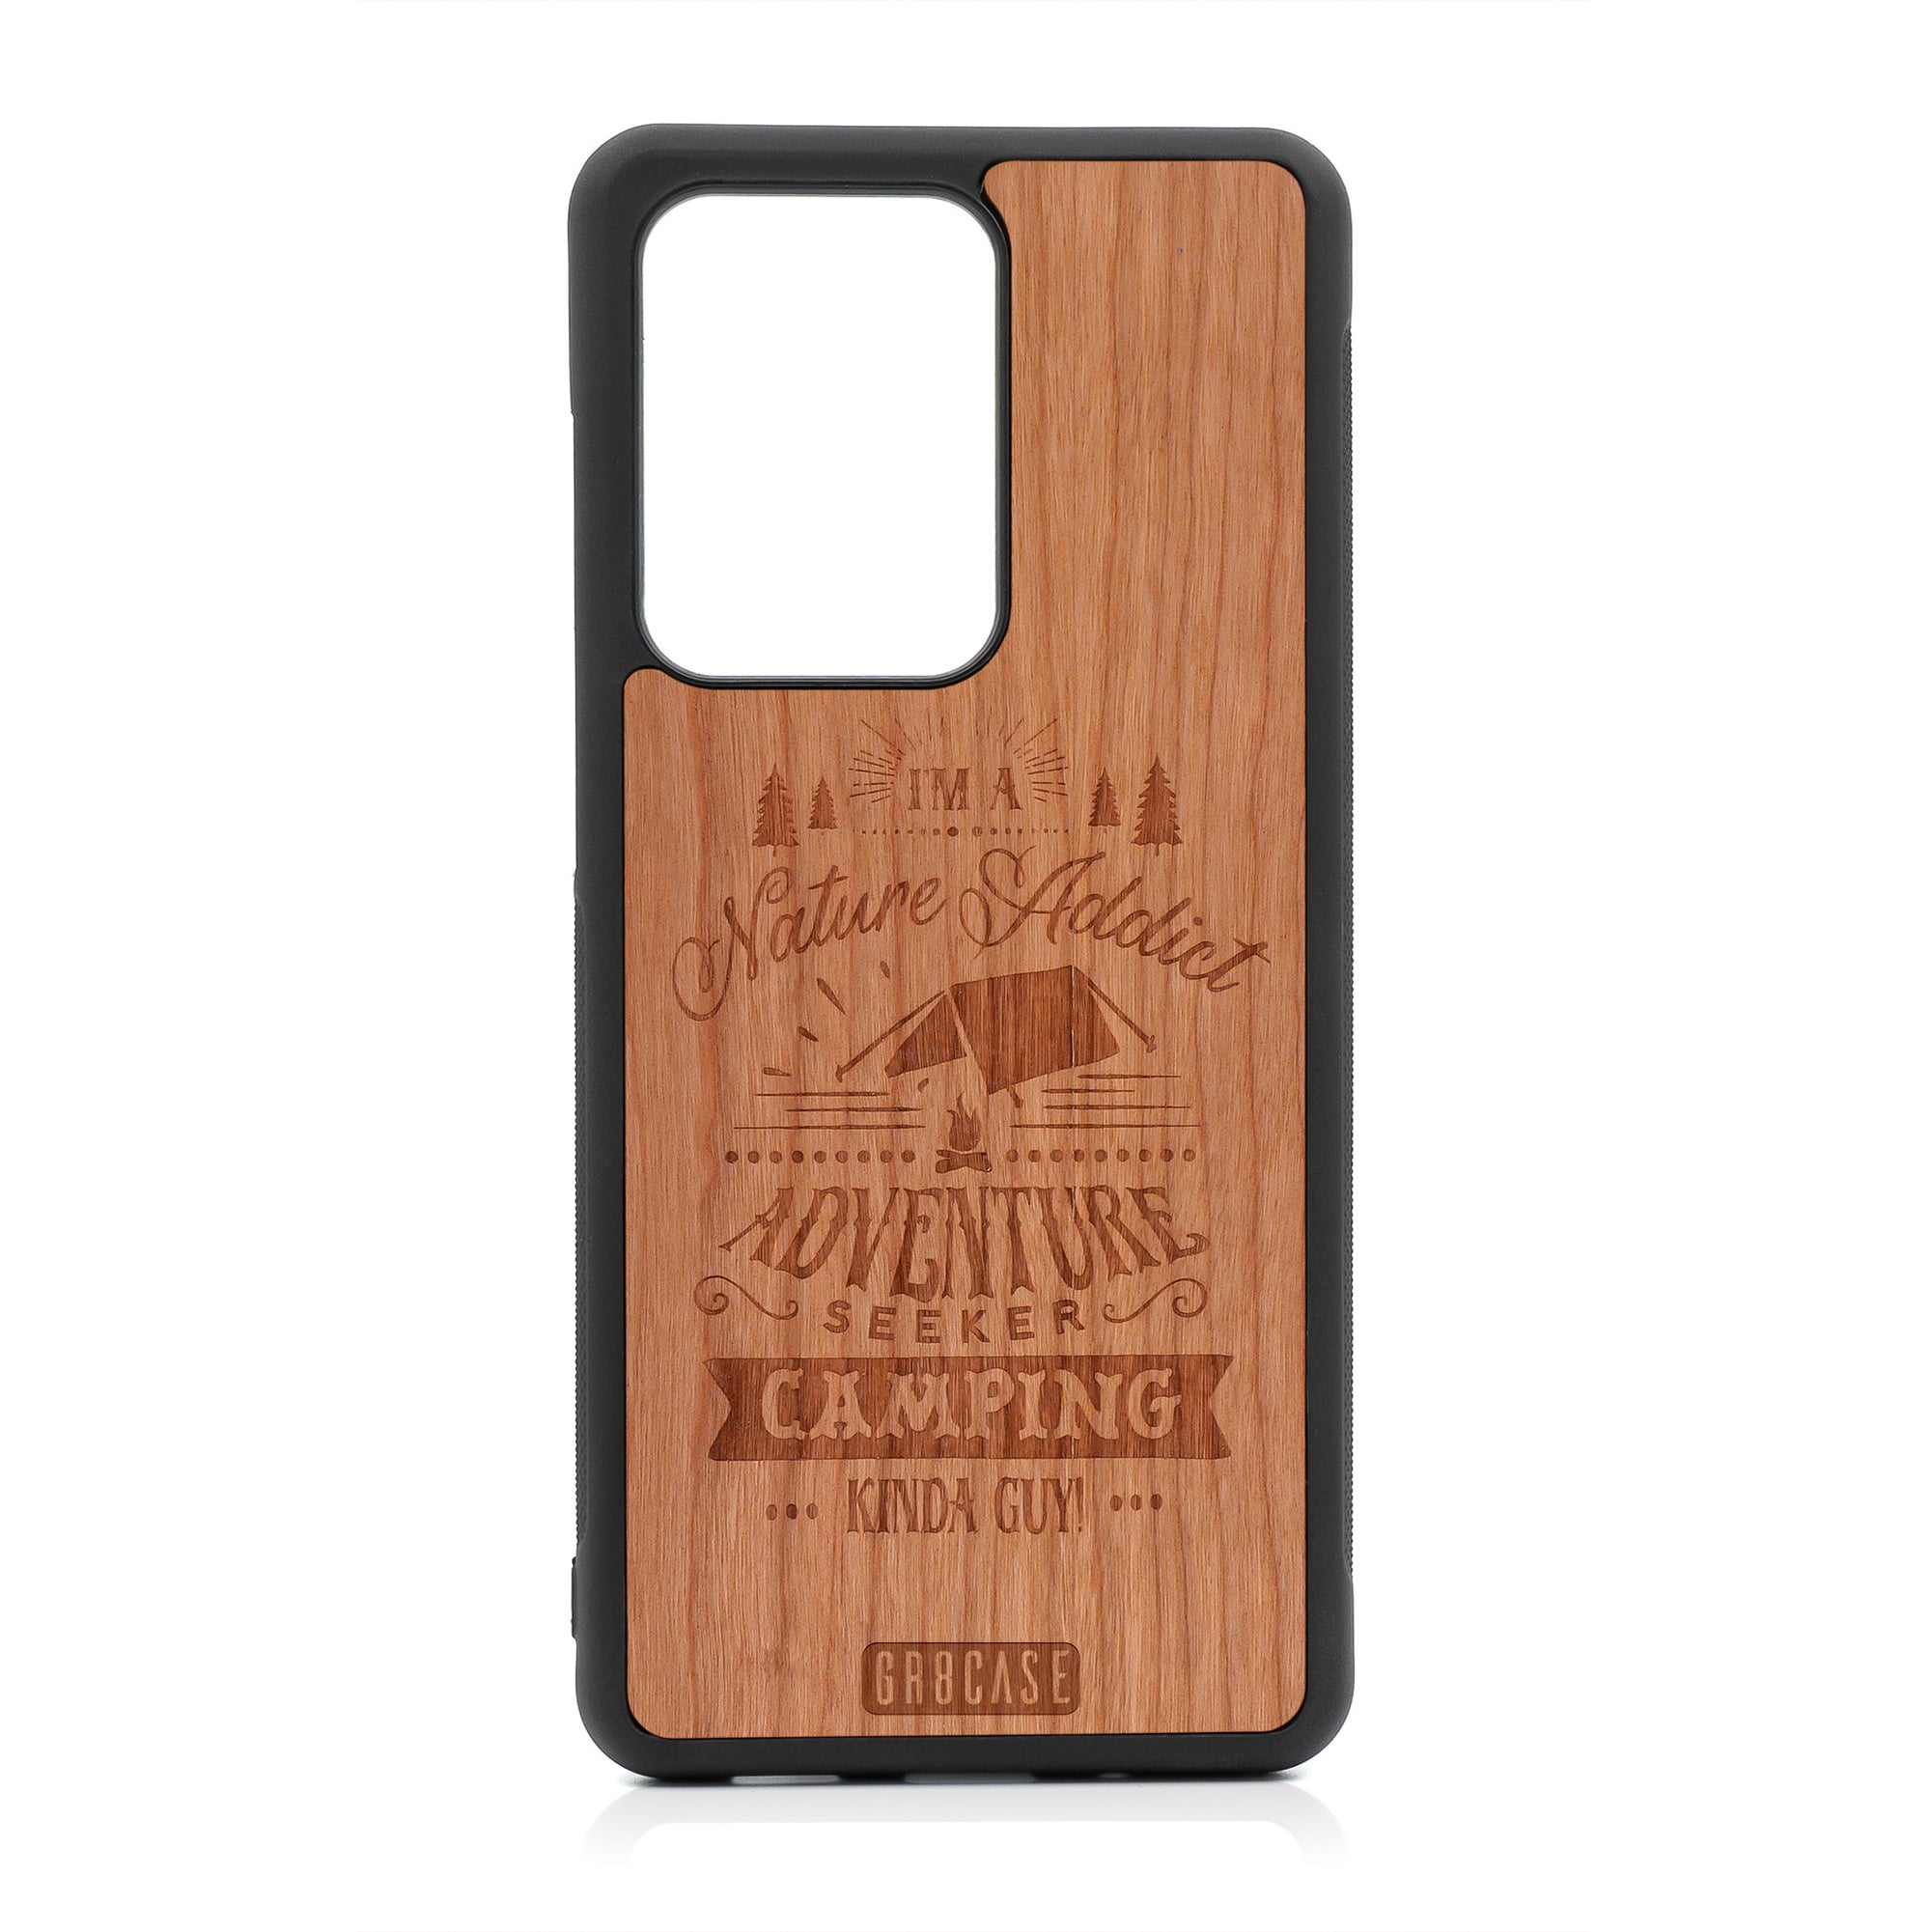 I'm A Nature Addict Adventure Seeker Camping Kinda Guy Design Wood Case For Samsung Galaxy S20 Ultra by GR8CASE